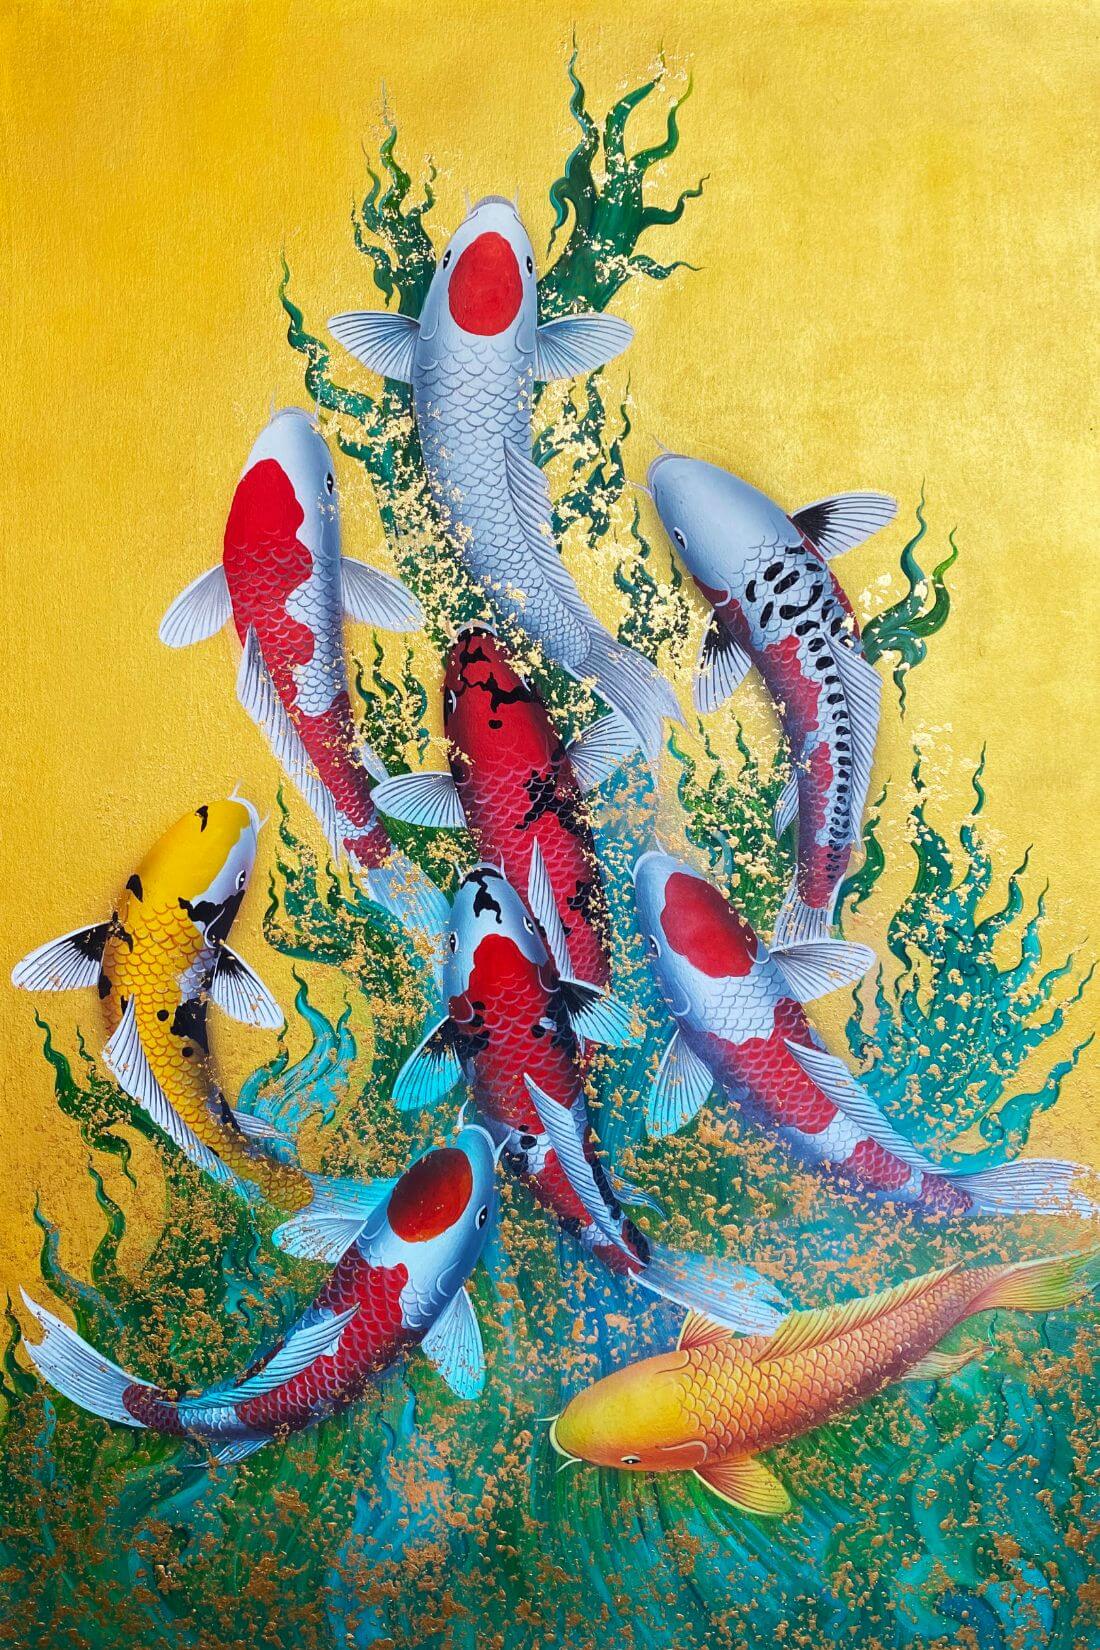 Nine Koi Fish Upstream - Prosperity And Family Strength - Feng Shui Painting  - Art Prints By Roselyn Imani | Buy Posters, Frames, Canvas & Digital Art  Prints | Small, Compact, Medium And Large Variants